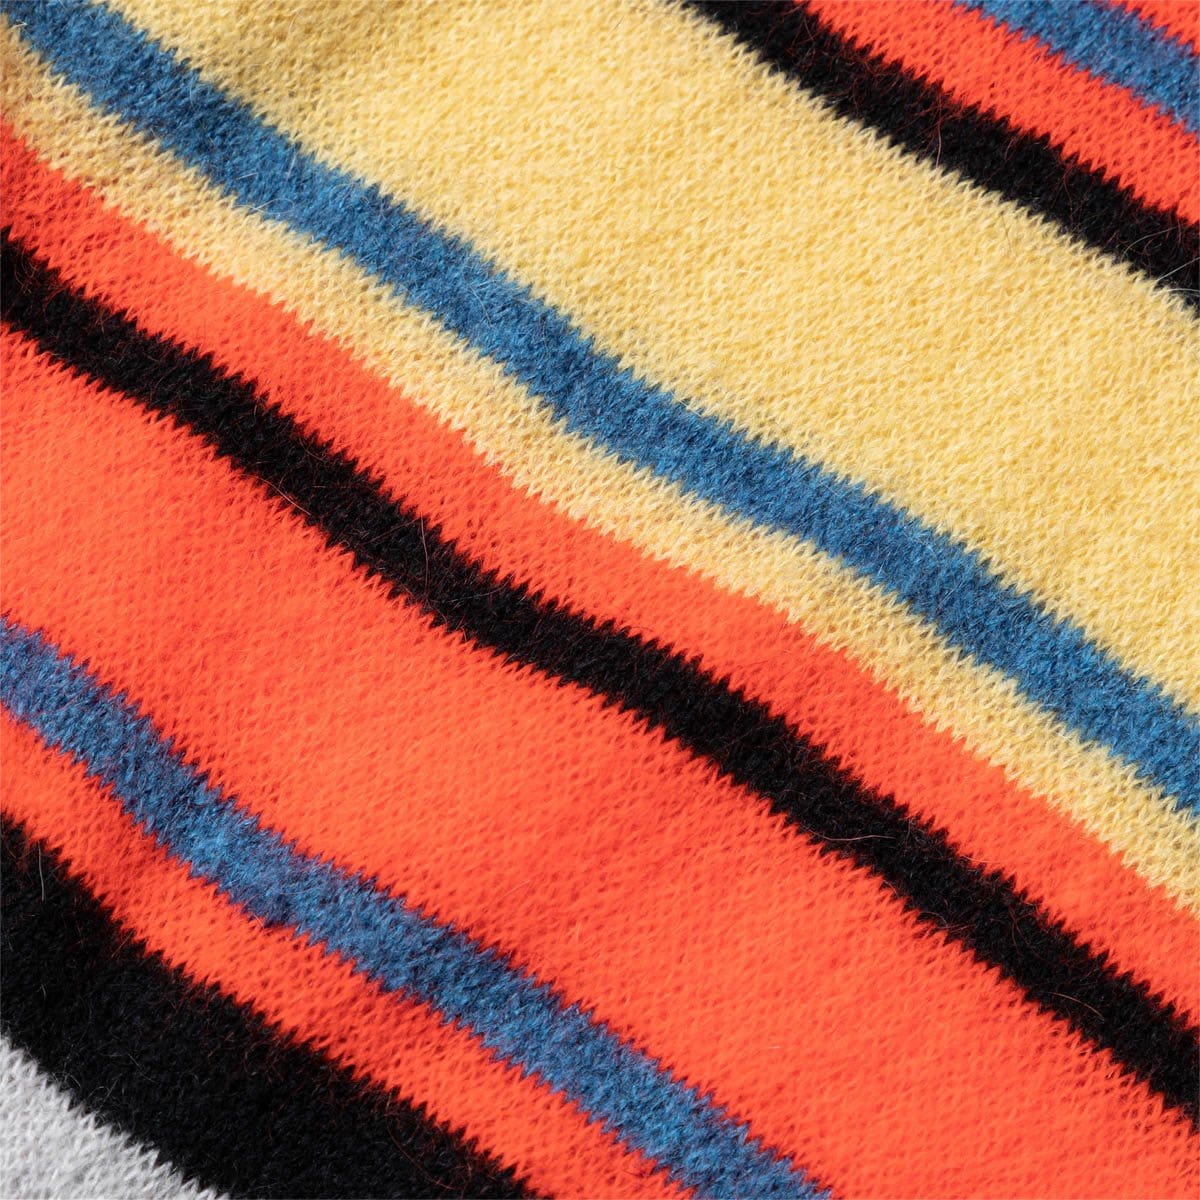 Garbstore Knitwear THE ENGLISH DIFFERENCE MULTI STRIPE CREW